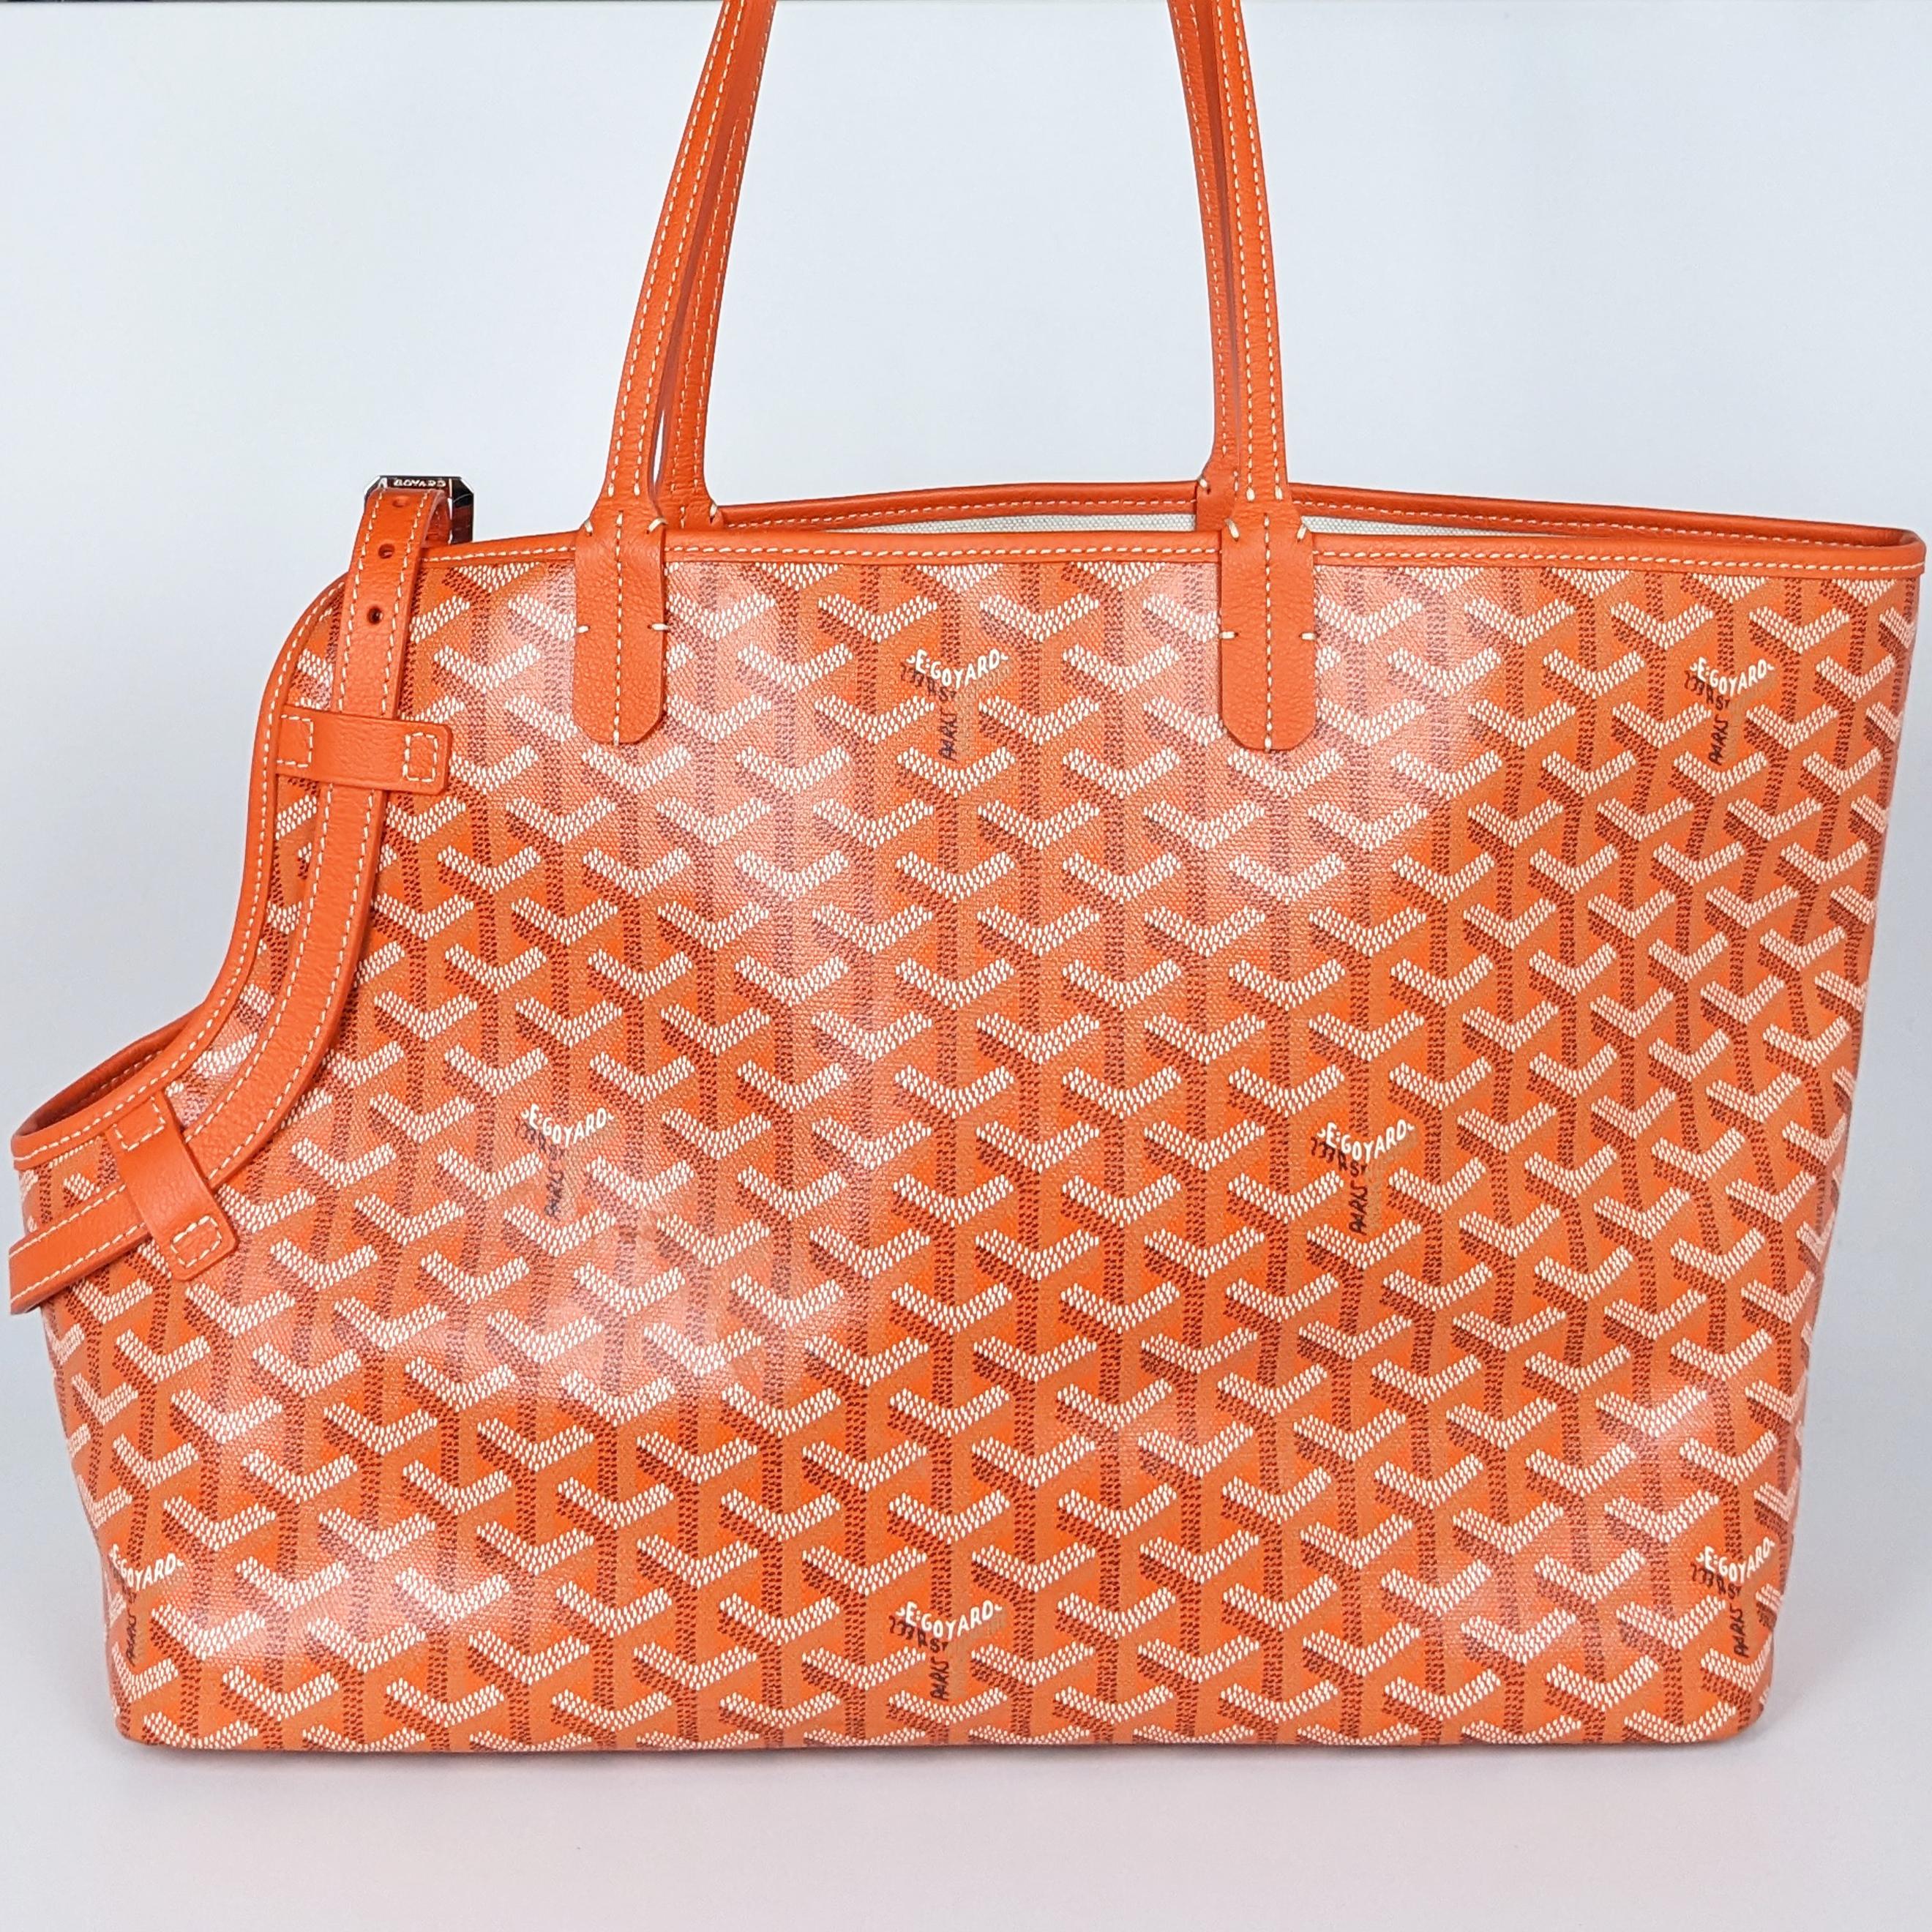 Condition: This authentic Goyard pet tote is in great pre-loved condition. There is light staining on the interior and minor wear to glazing.

Includes: Removable base liner

Features: Thin leather top handles and leather trim around the opening of